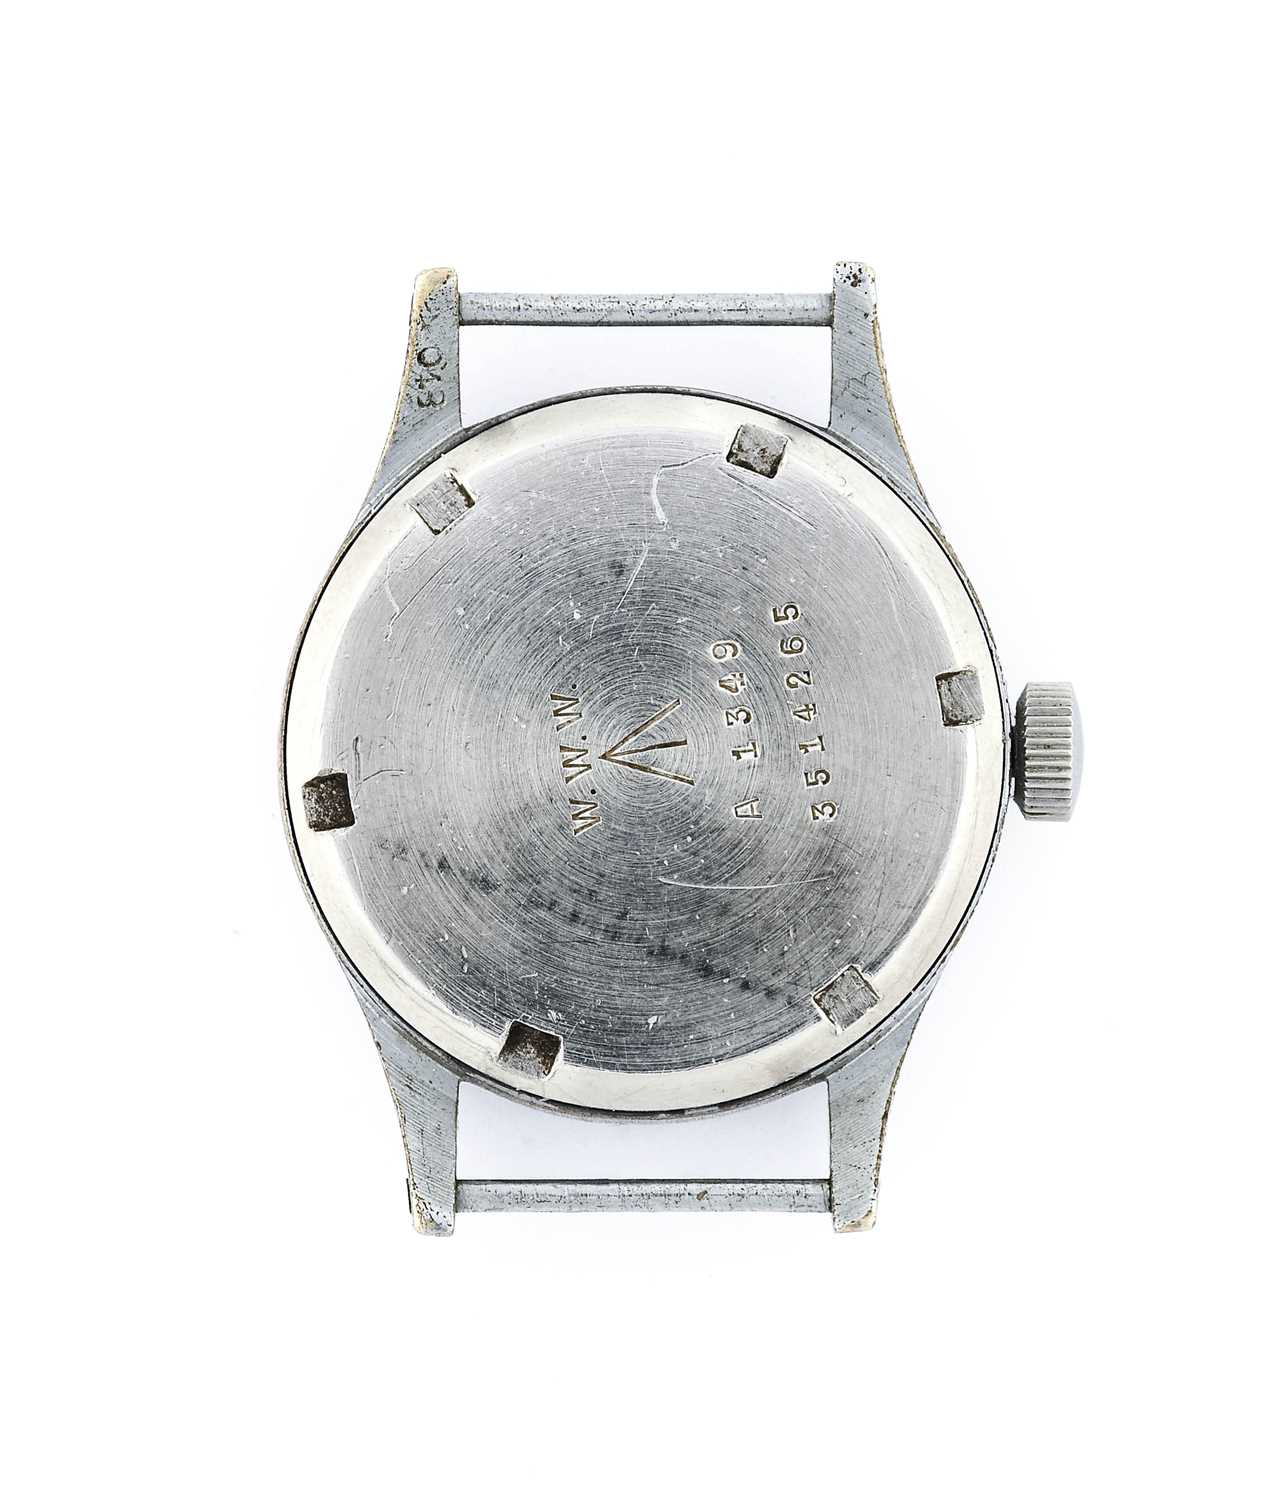 Vertex: A World War II Military Wristwatch, signed Vertex, Known by Collectors as One of "The - Image 2 of 2